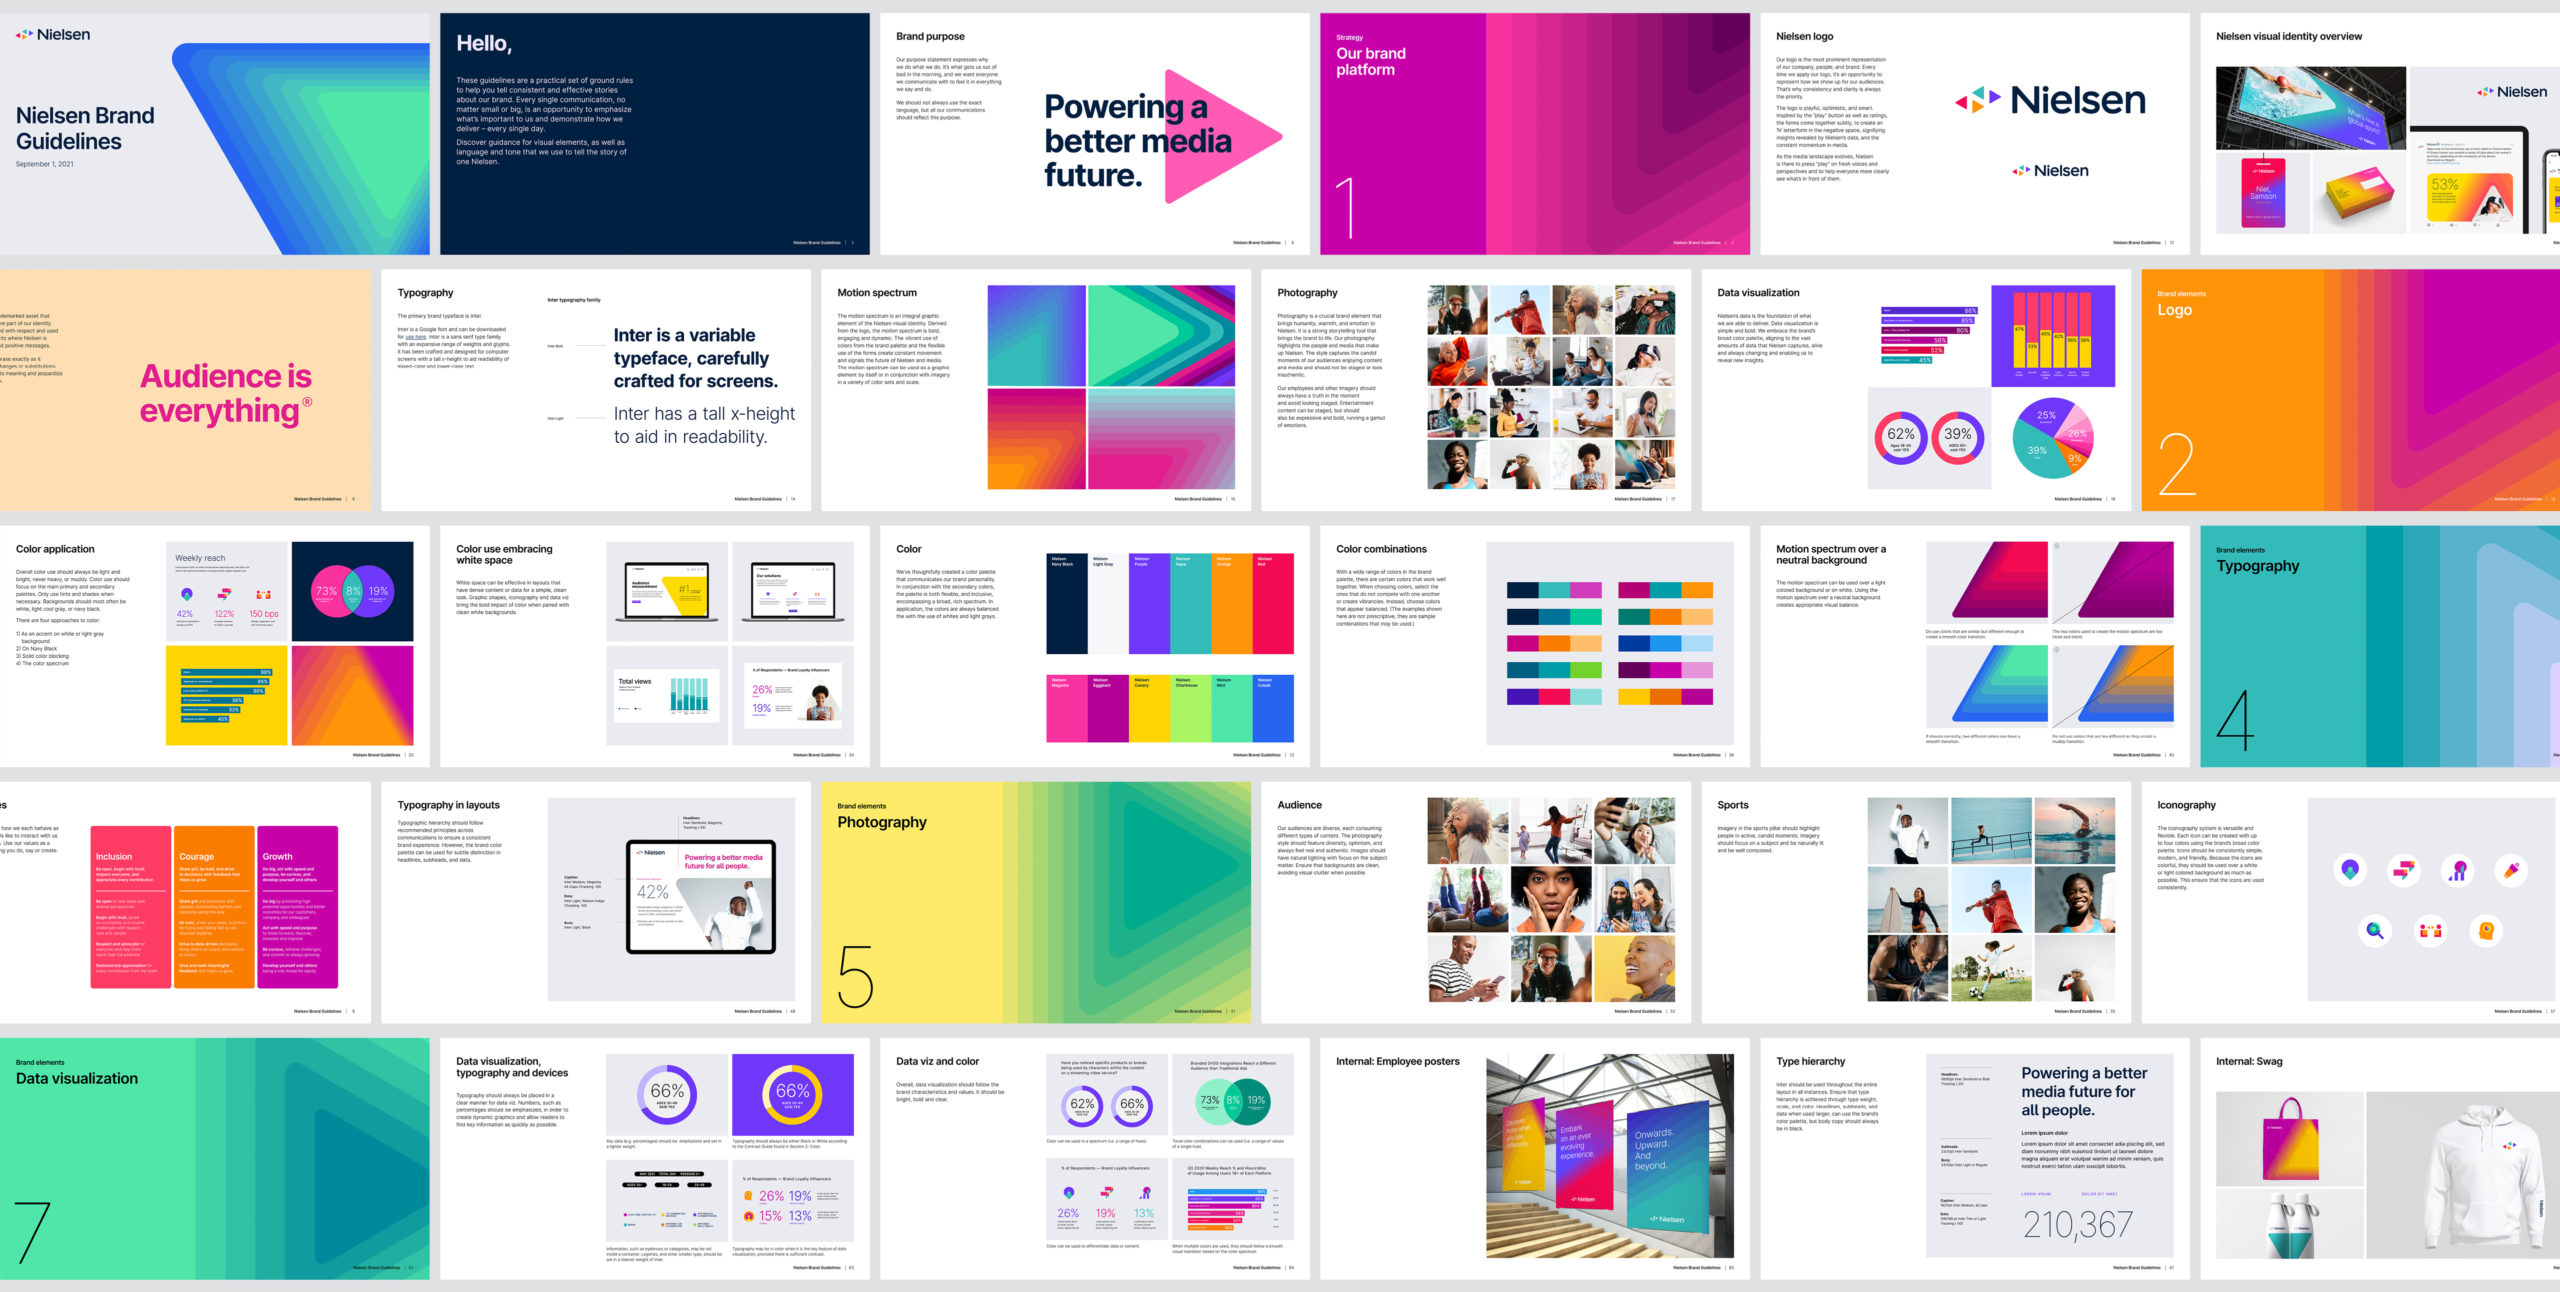 Nielsen’s new brand guidelines showcasing elements of their new visual identity